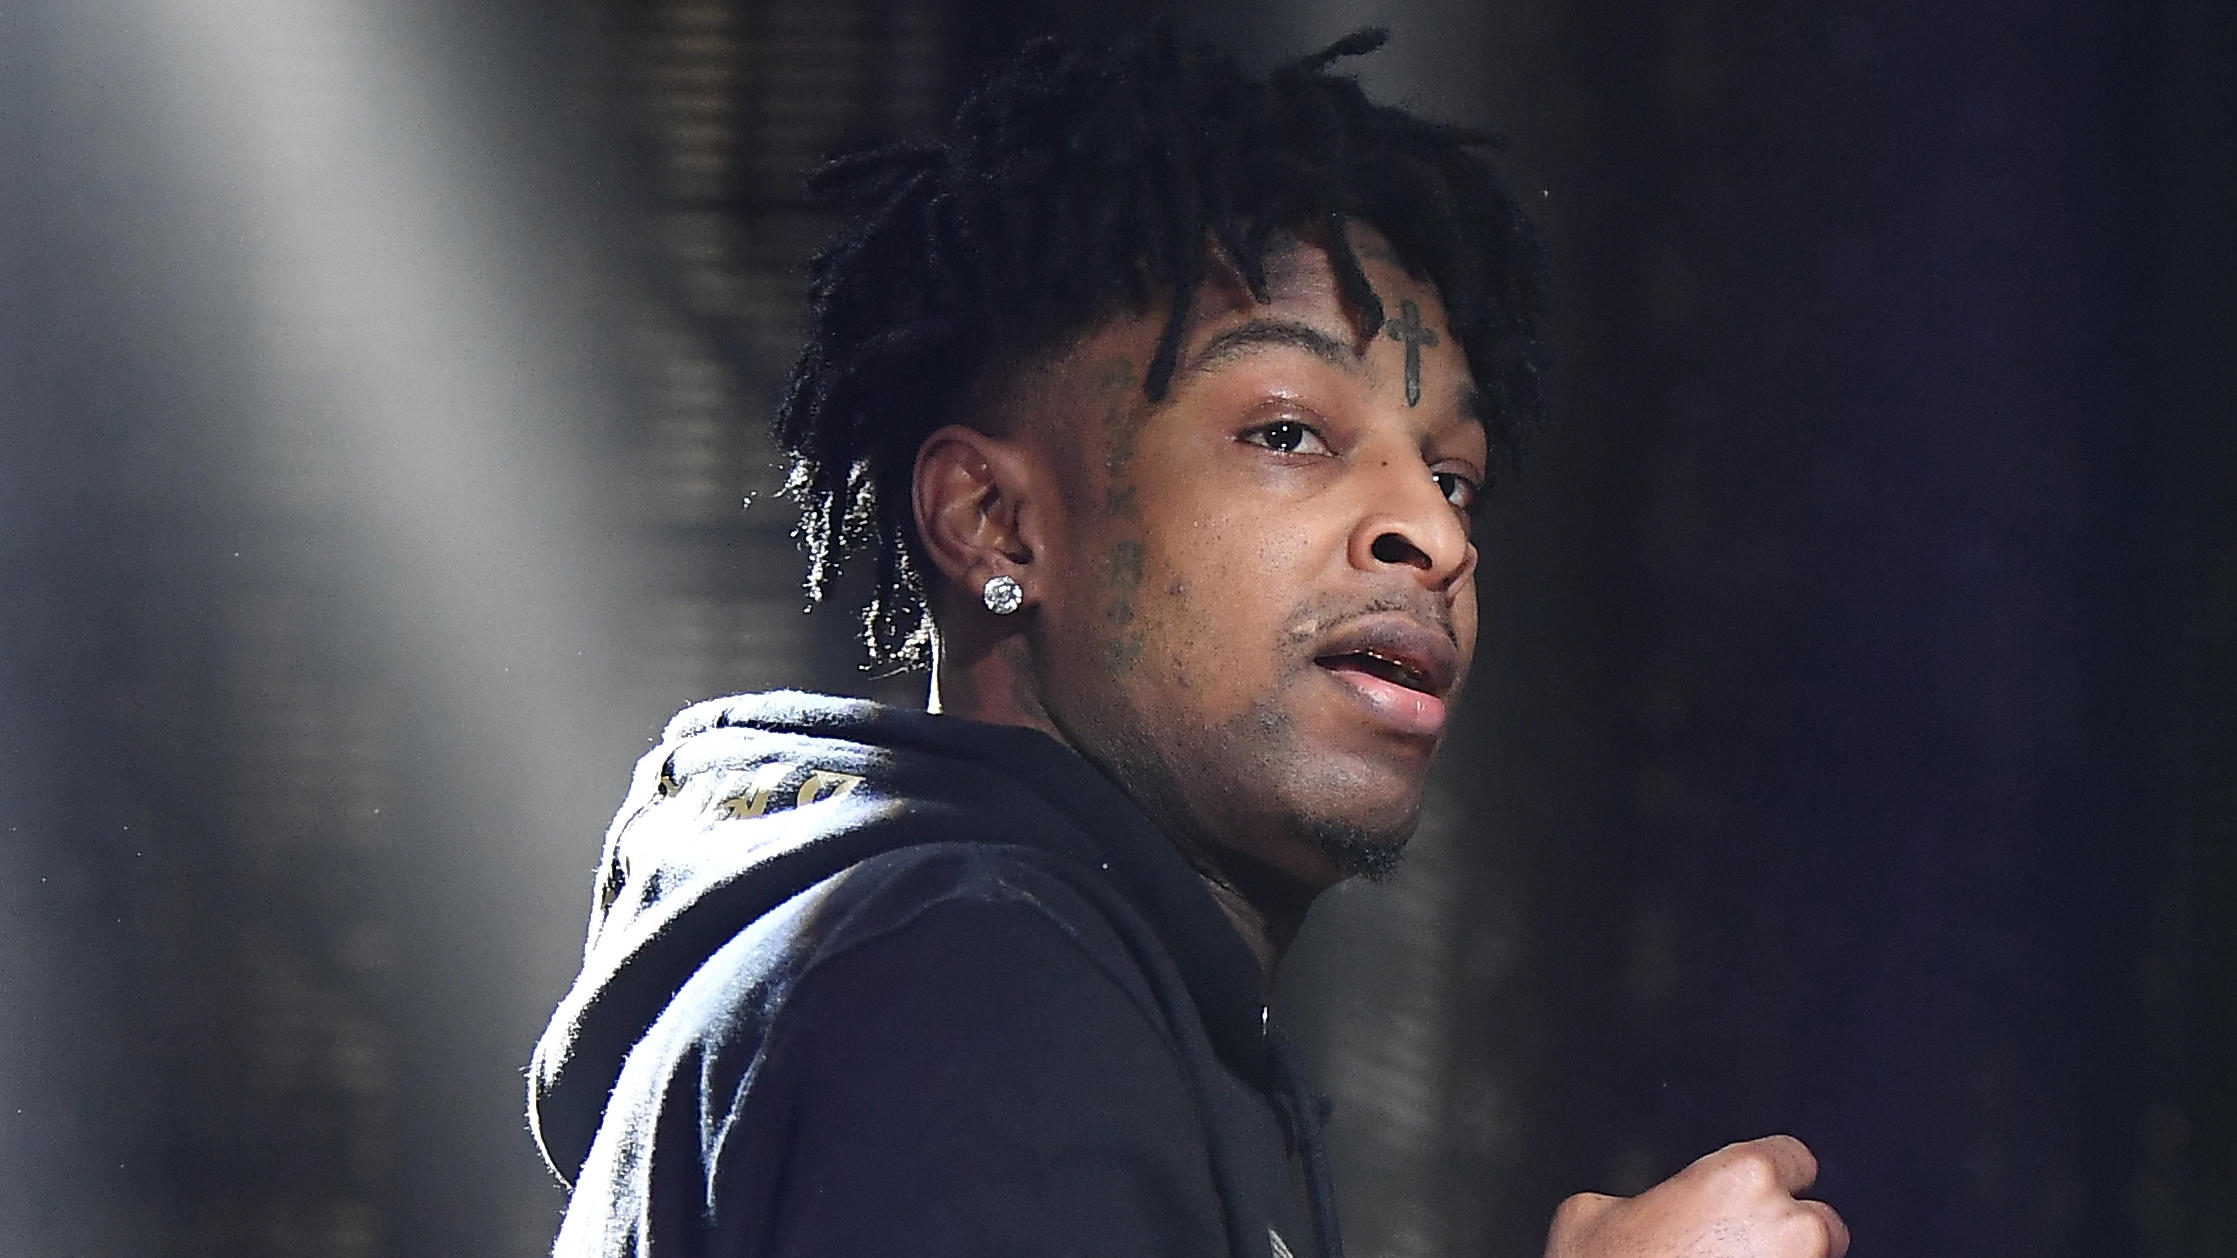 Rapper 21 Savage Granted Bond By Ice Ahead Of Release Wfae